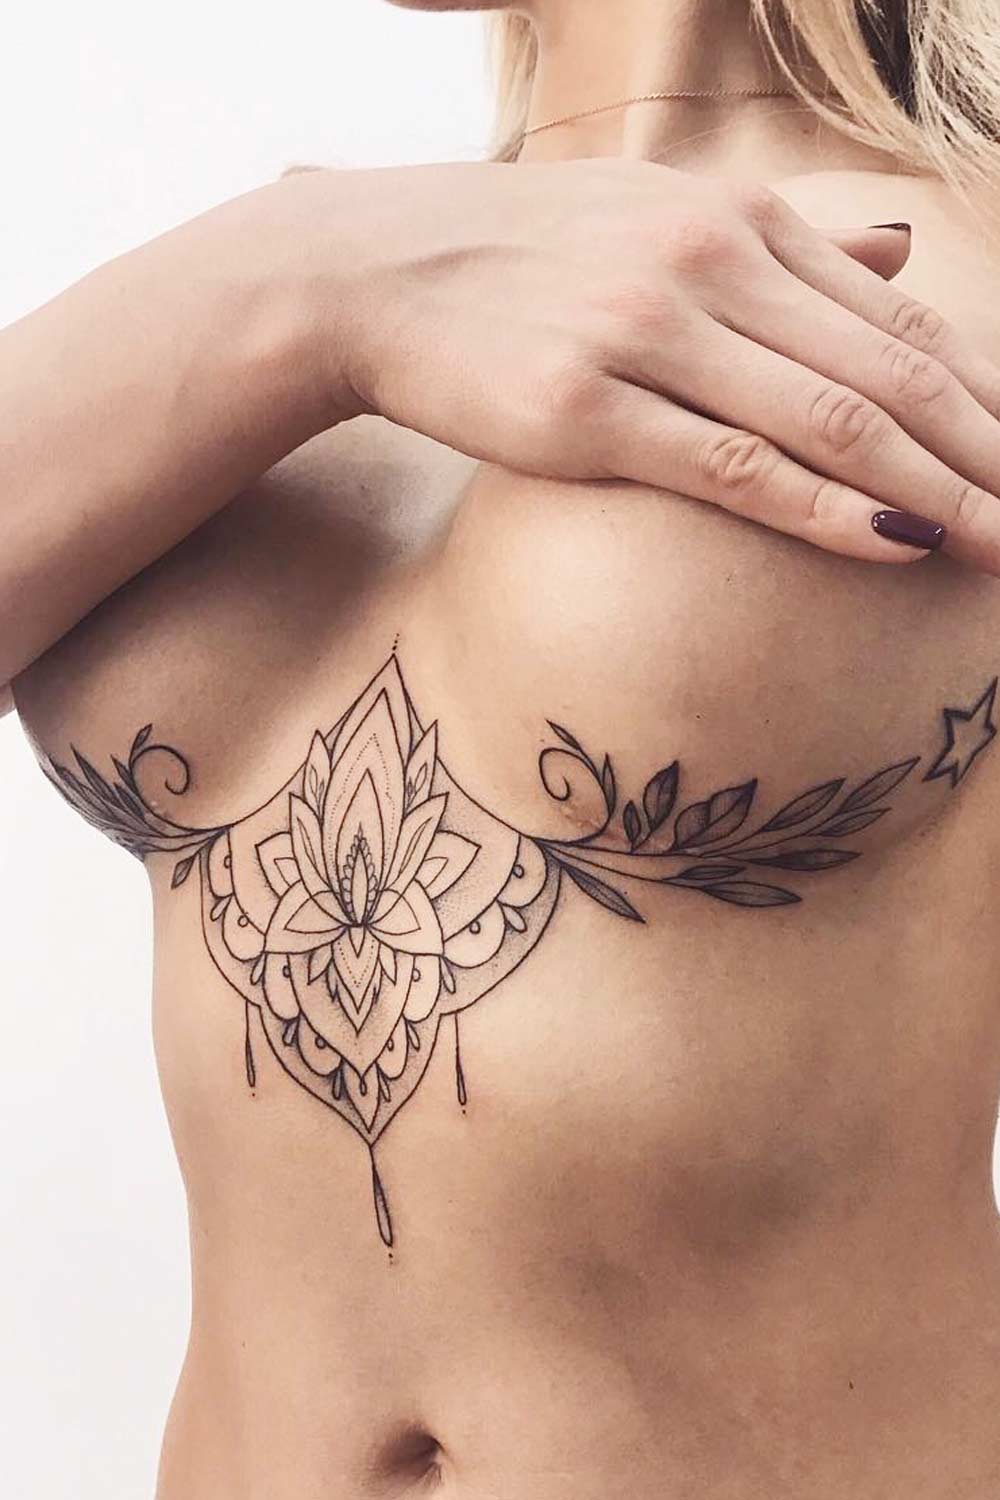 Sternum Tattoos: What You Need To Know Before Getting Inked